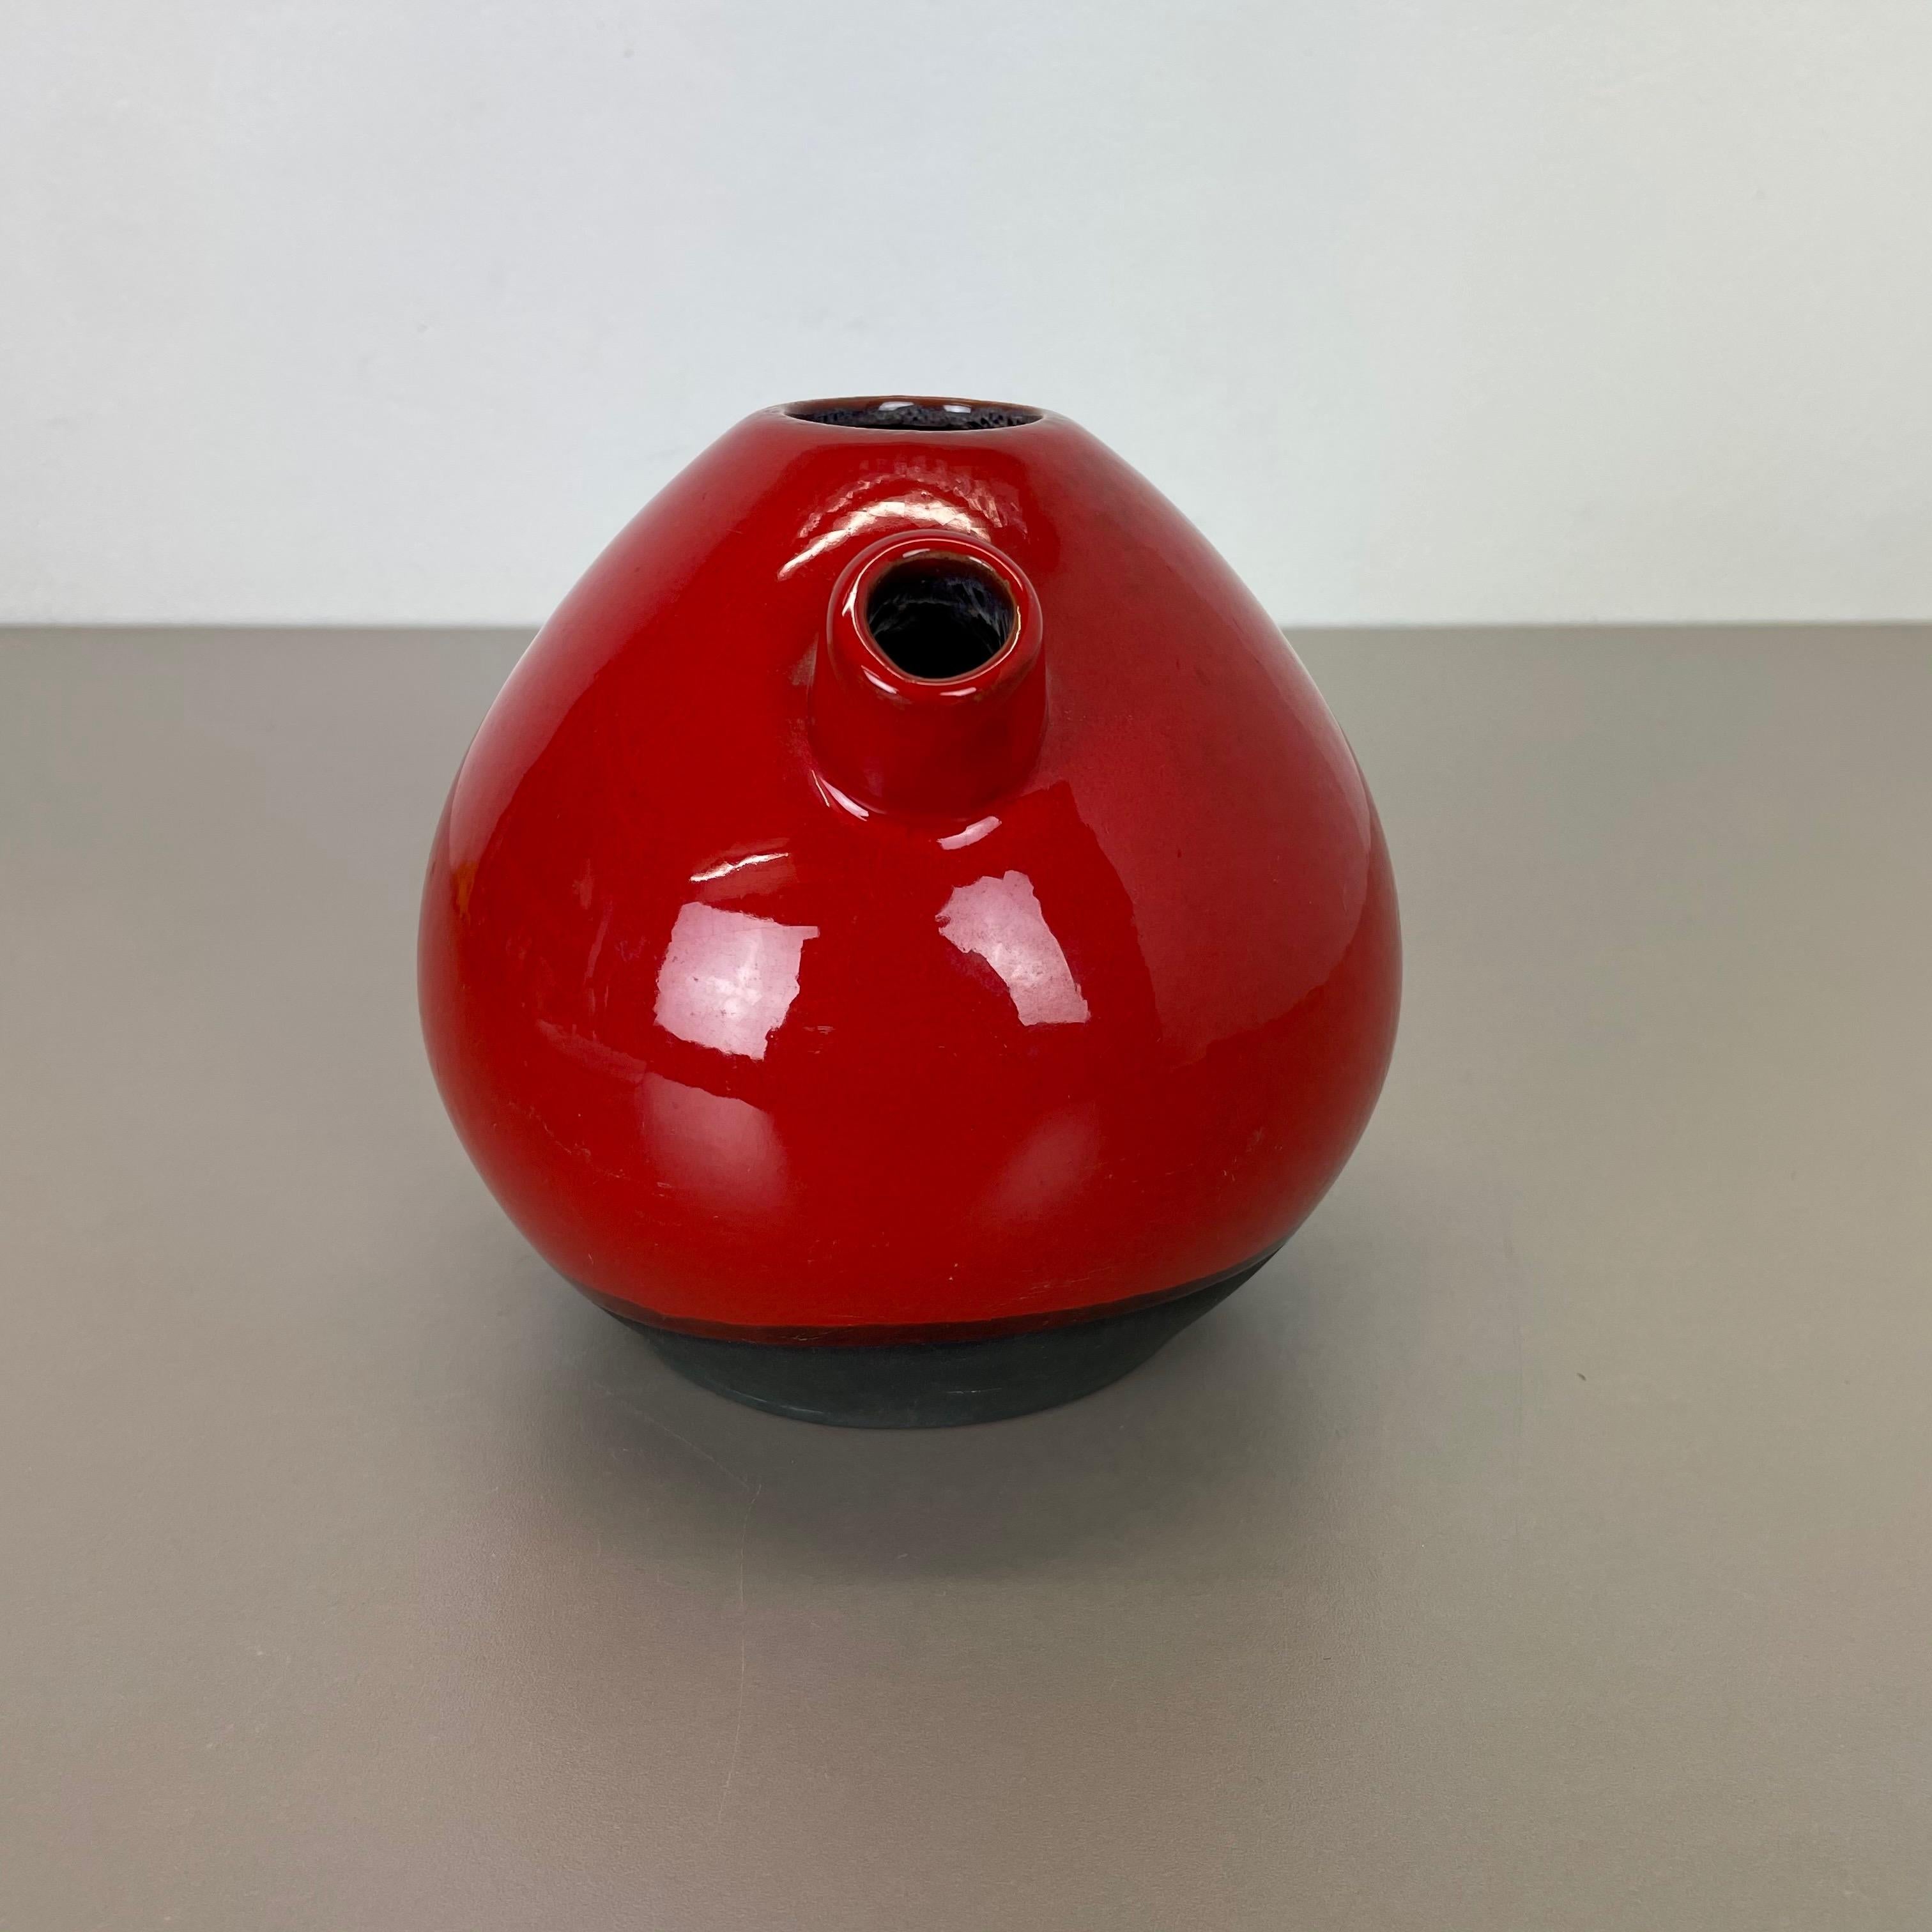 Original 1970 Red Ceramic Studio Pottery Vase by Marei Ceramics, Germany In Good Condition For Sale In Kirchlengern, DE